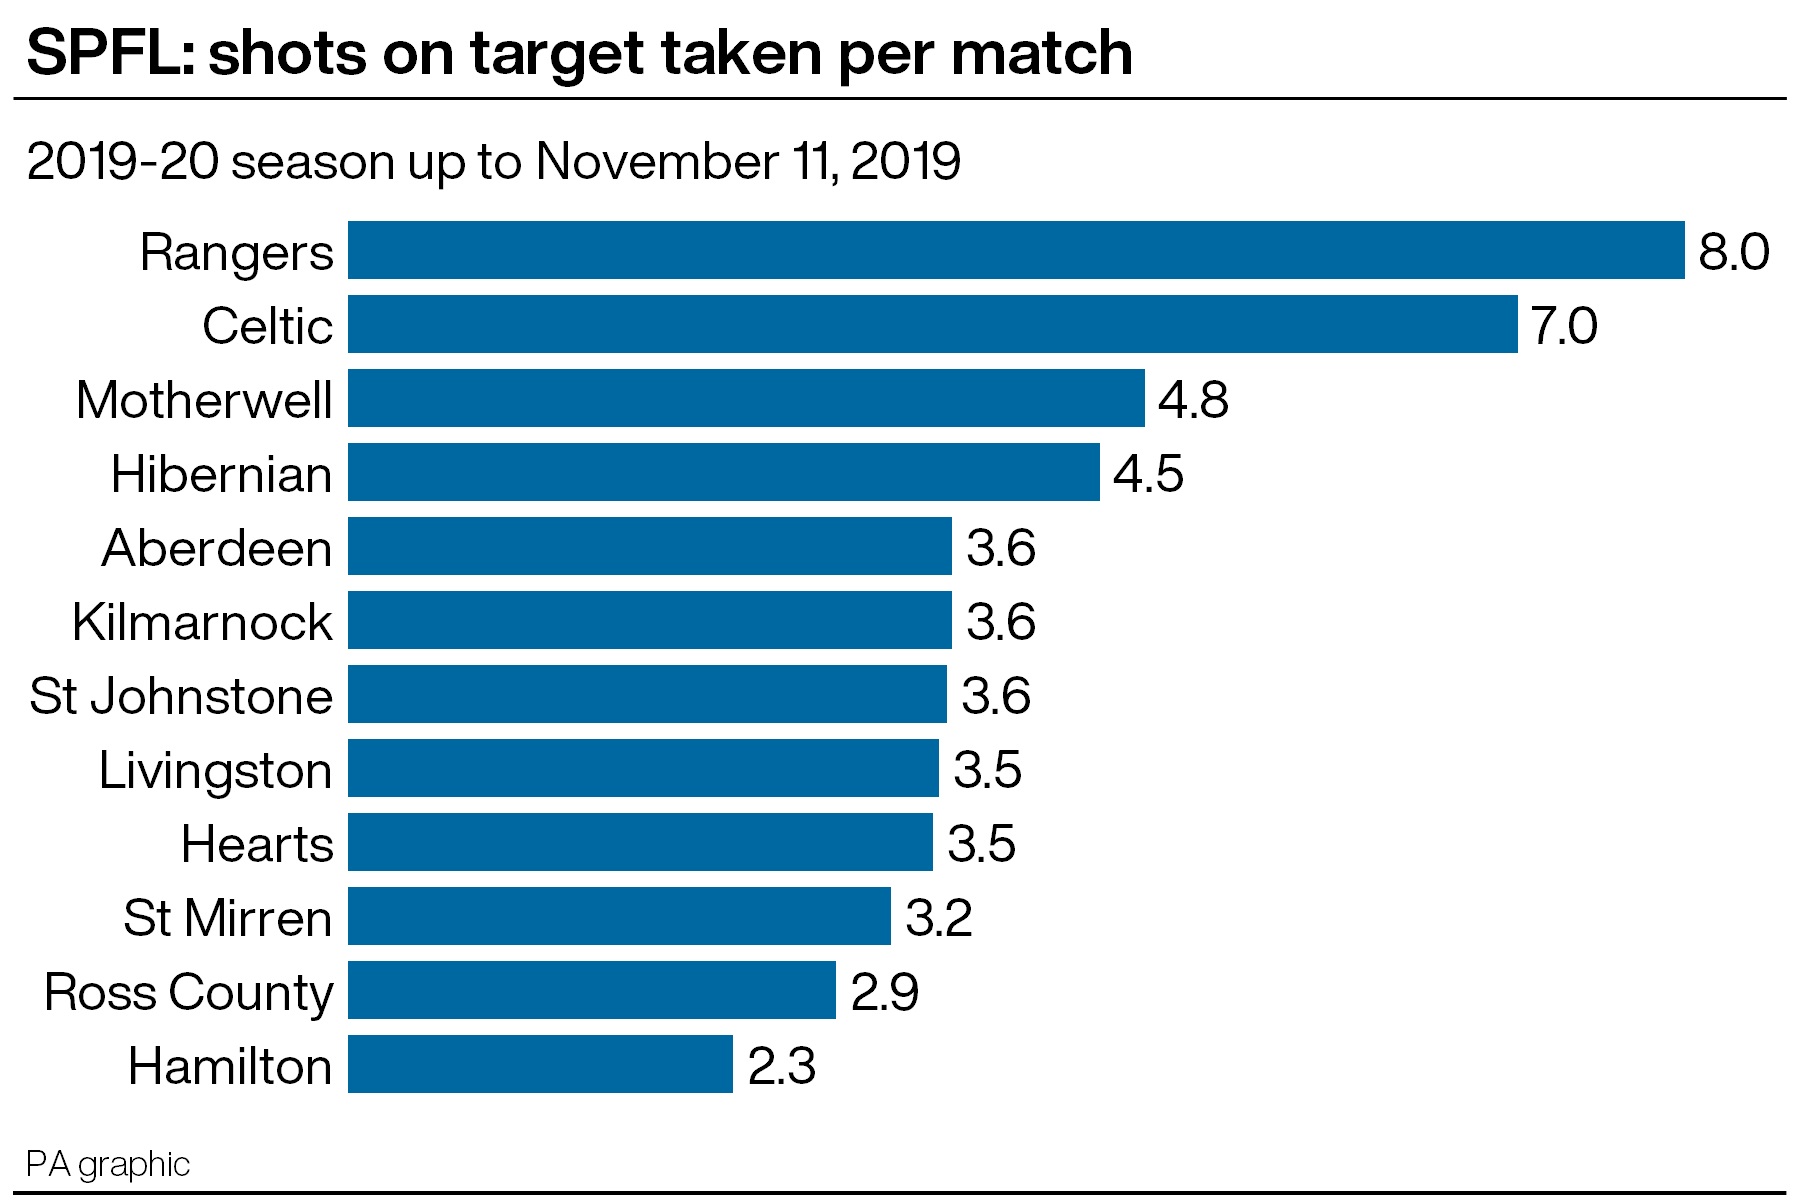 Rangers hit the target more often than any other team